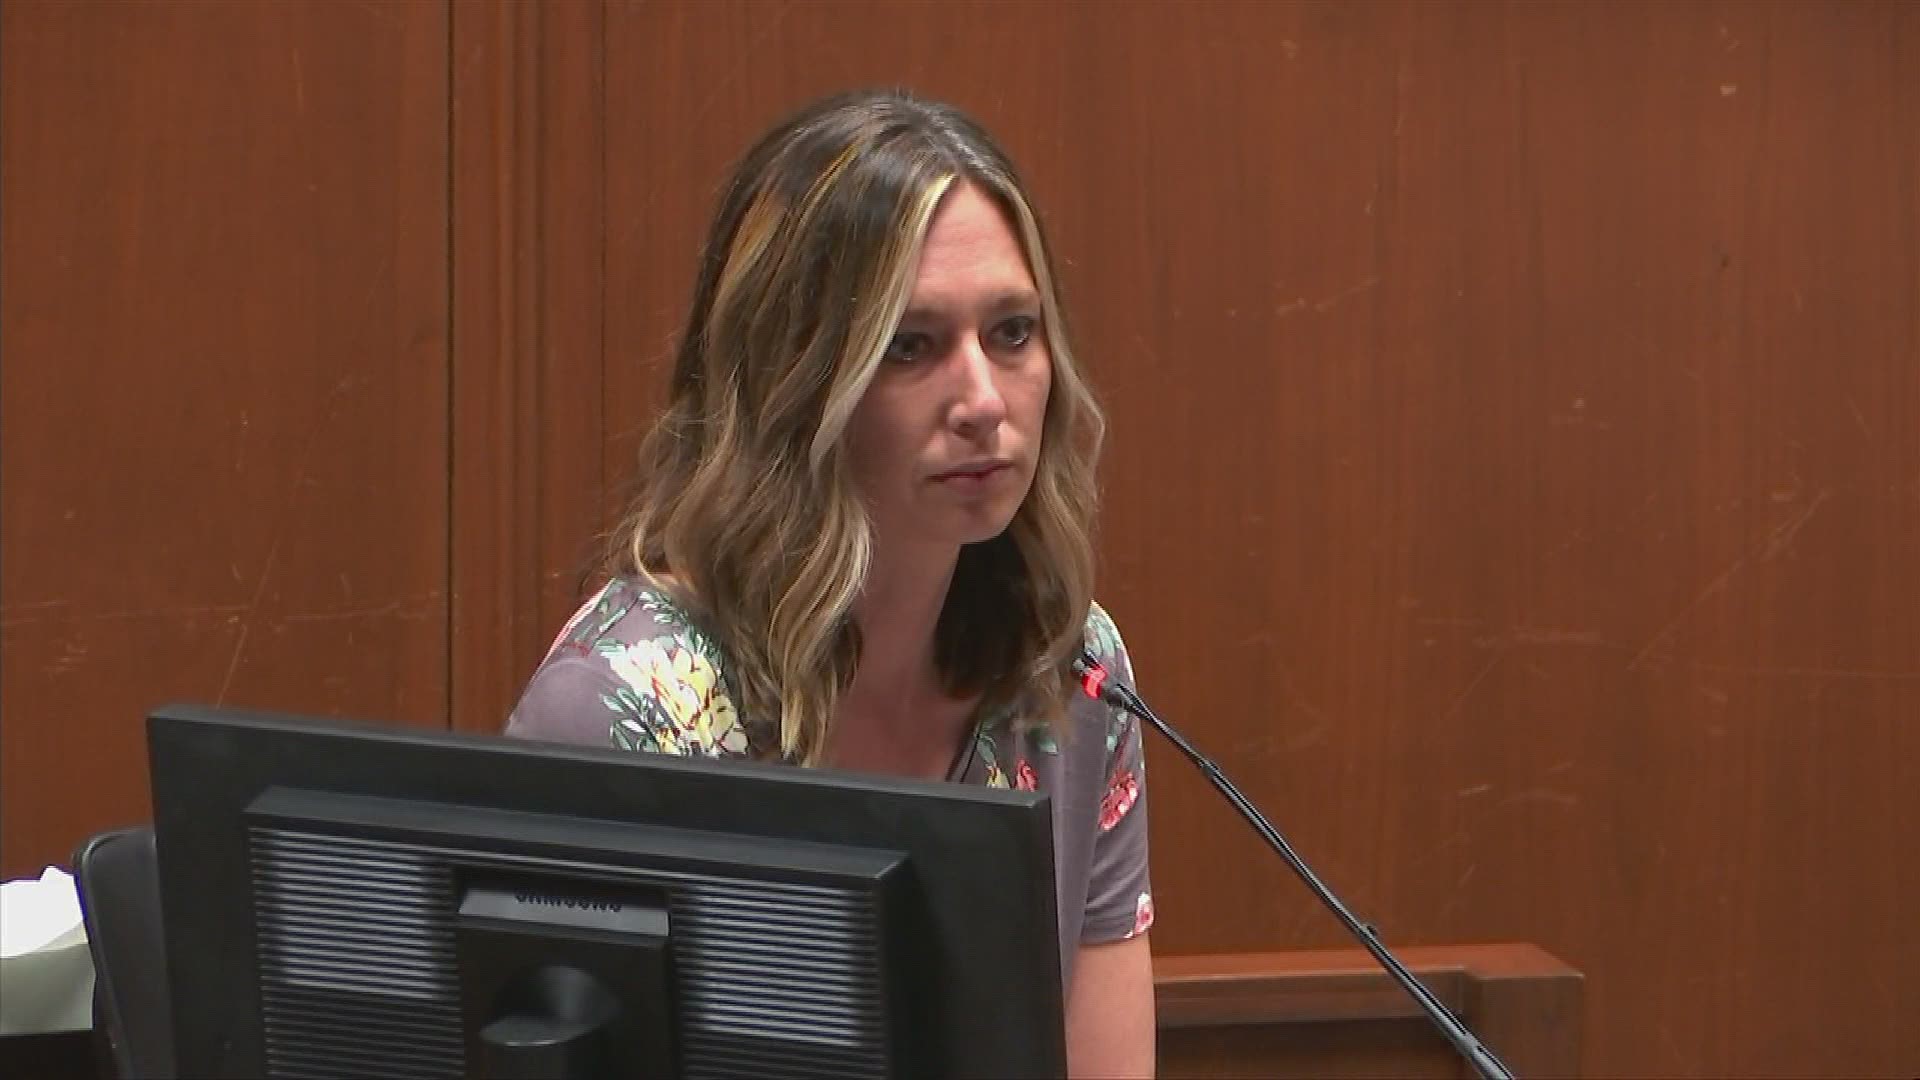 Beauty shop owner testifies she saw Mollie running while she drove to her parents' home.